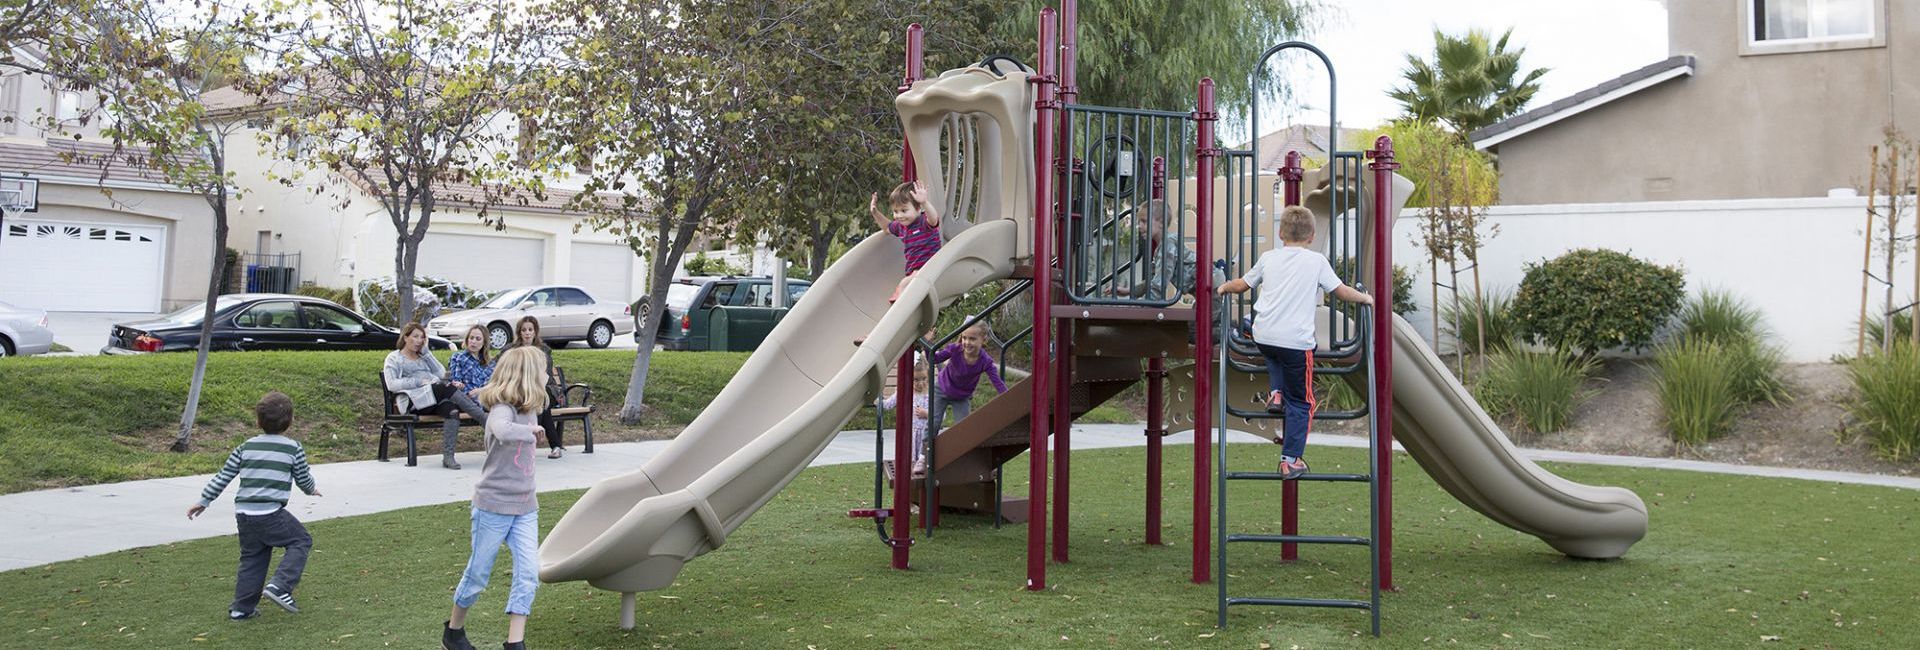 Featured image of maroon colored park with gray slide and children playing on it